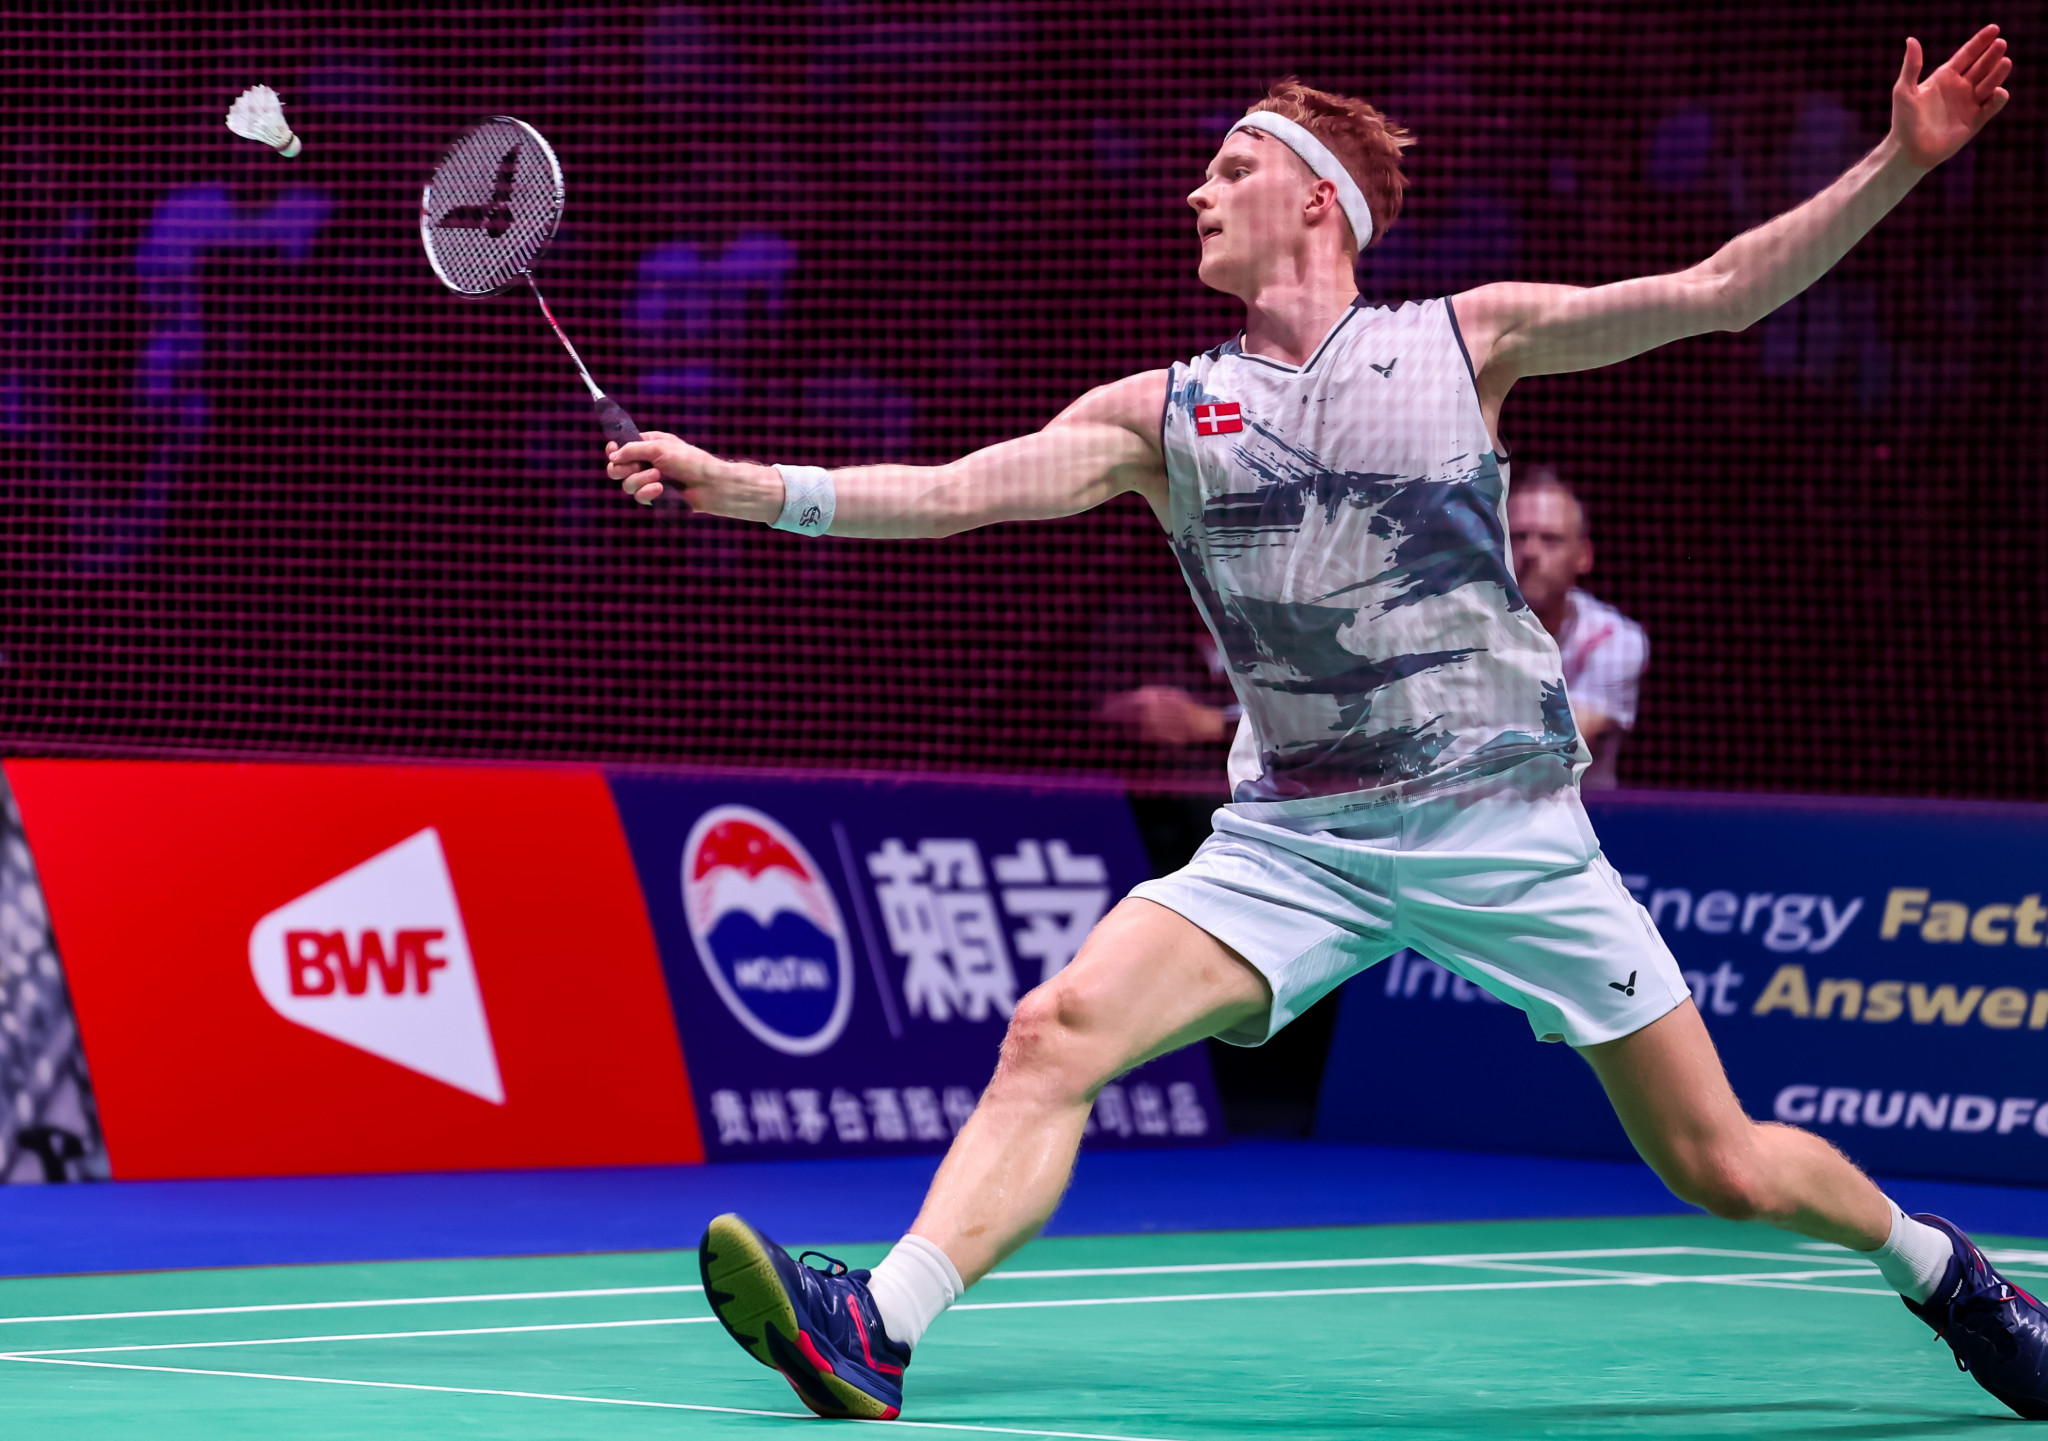 Two game points came and went for Anders Antonsen in the opening game as Kodai Naraoka snatched it ©Badmintonphoto